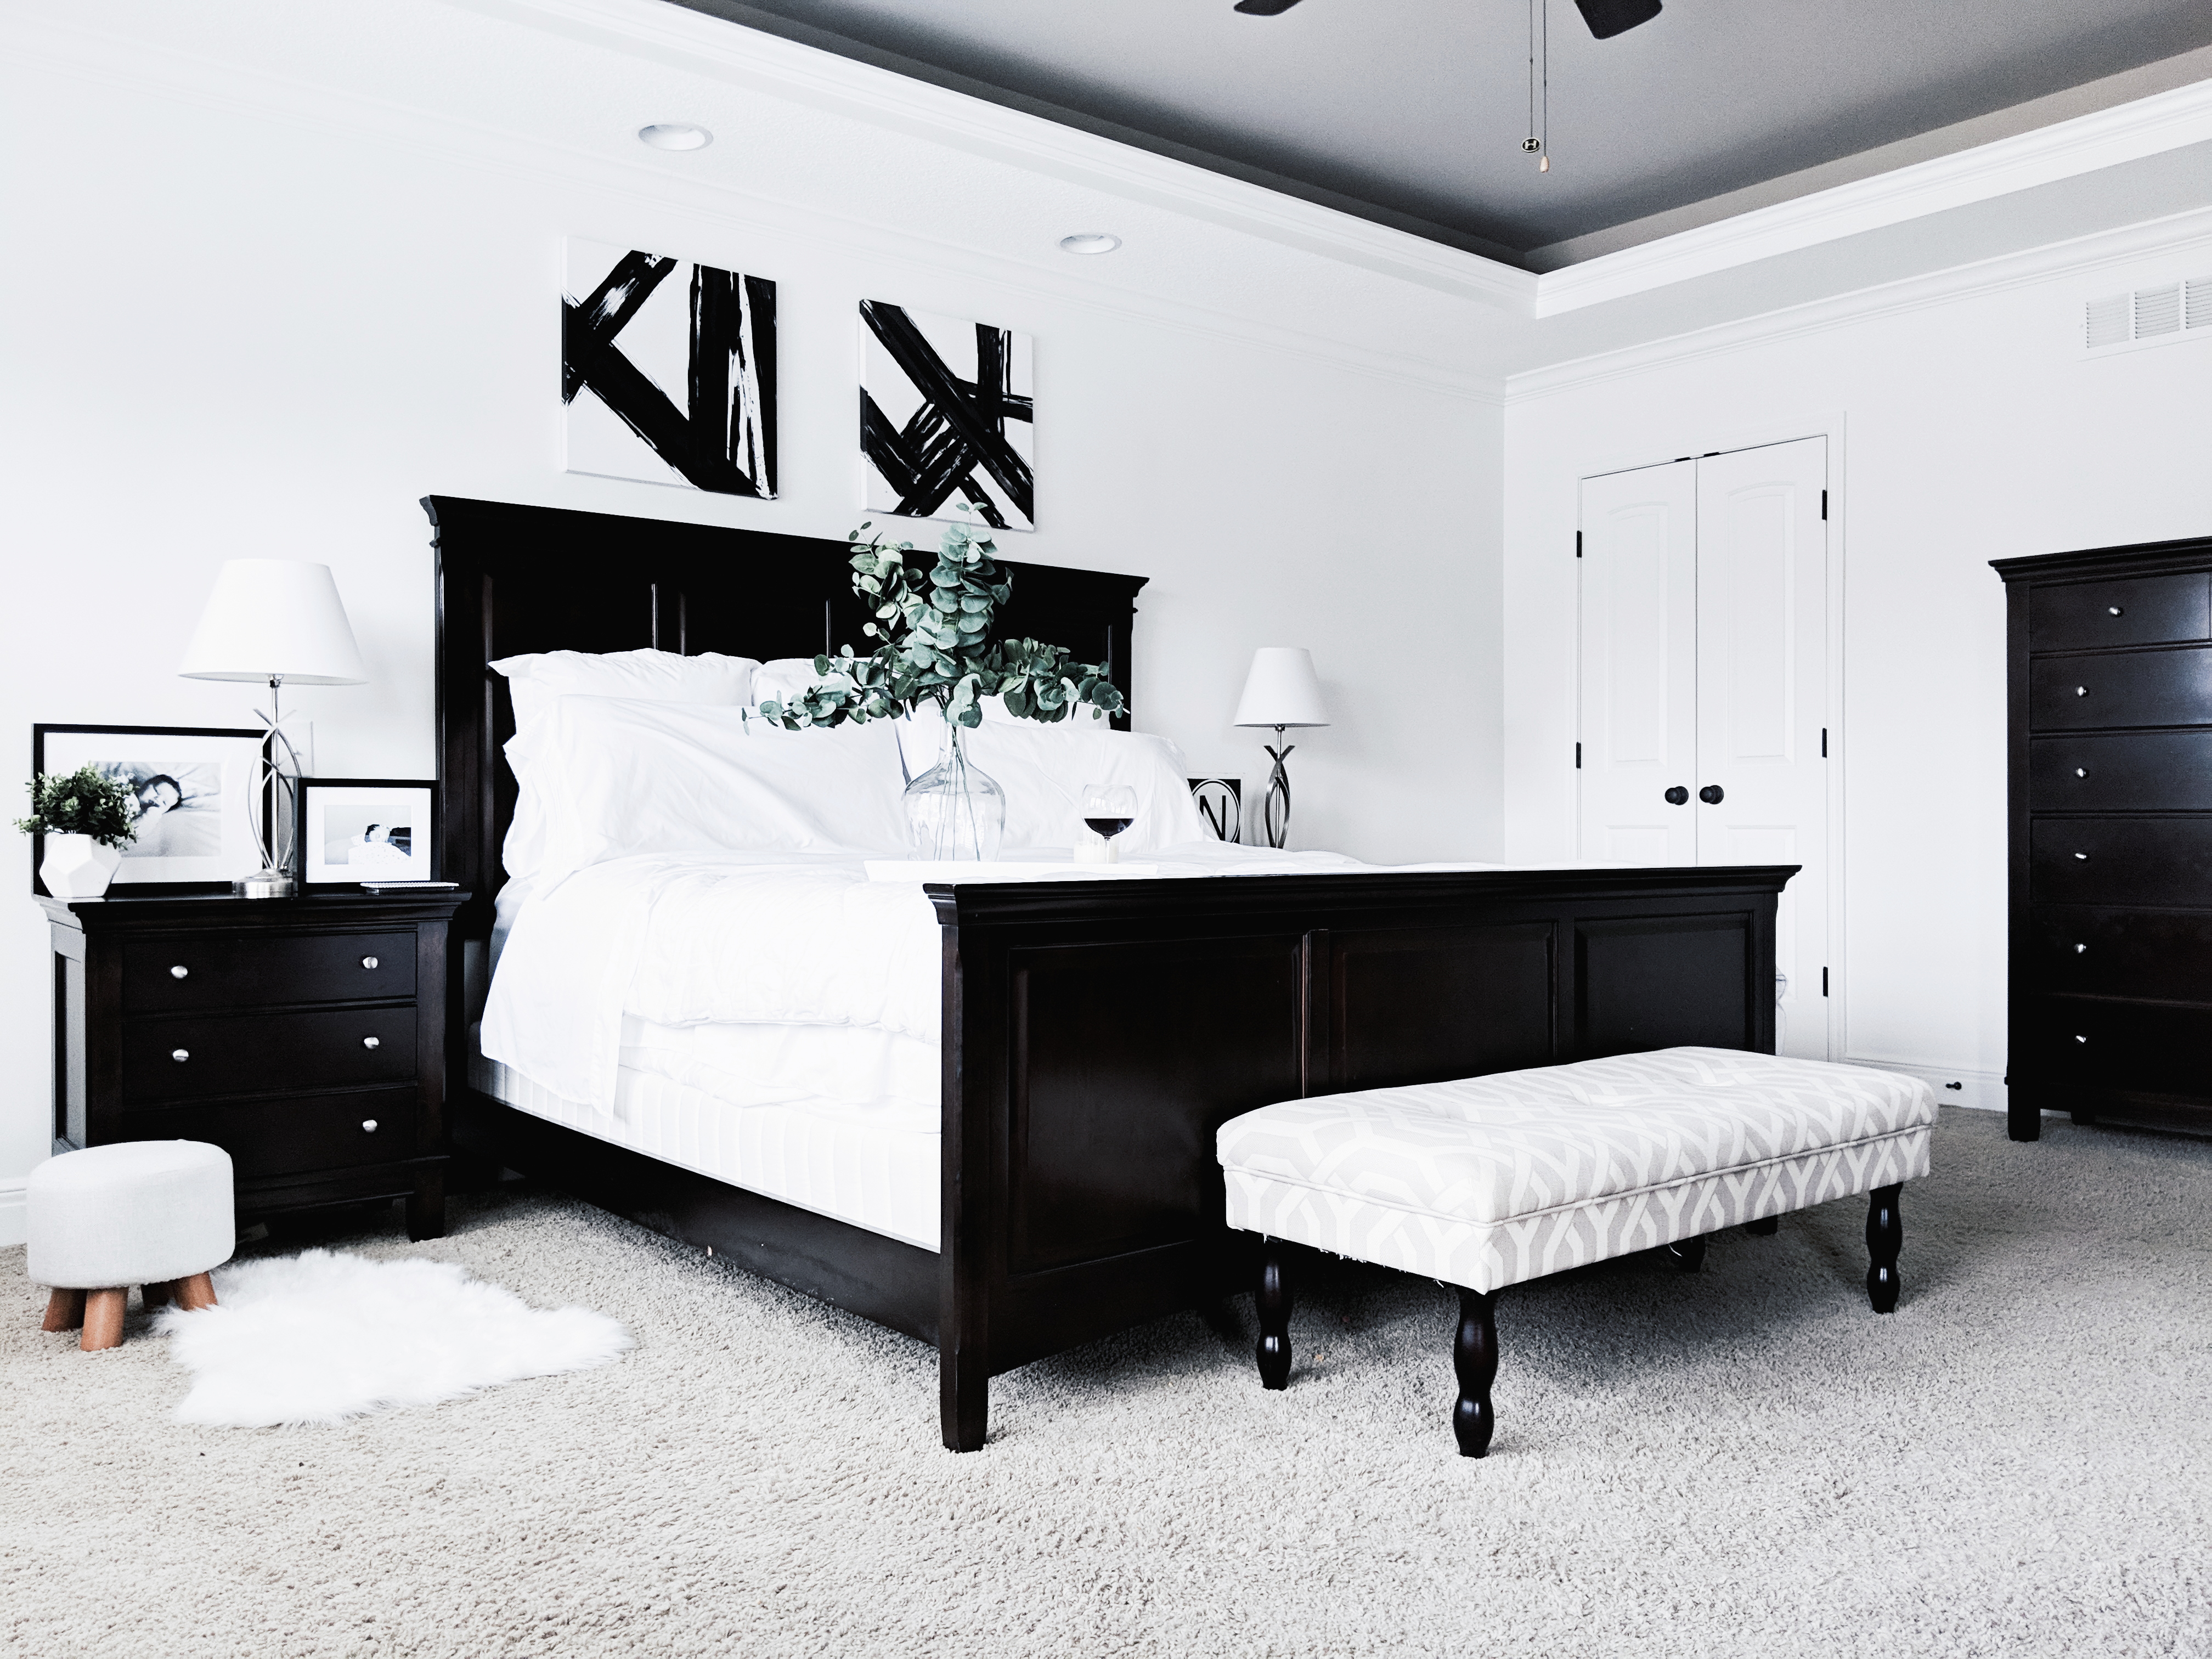 Black and White Master Bedroom Ideas: Inspiration for a monochrome master bedroom with classic black and white decor. Keep your bedroom sleek and modern with this chic black and white decor. The best part: all sources are affordable! Master bedroom inspo, master bedroom decor, white bedding, white bedroom. #MasterBedroom #HomeDecor #Modern #LTKhome